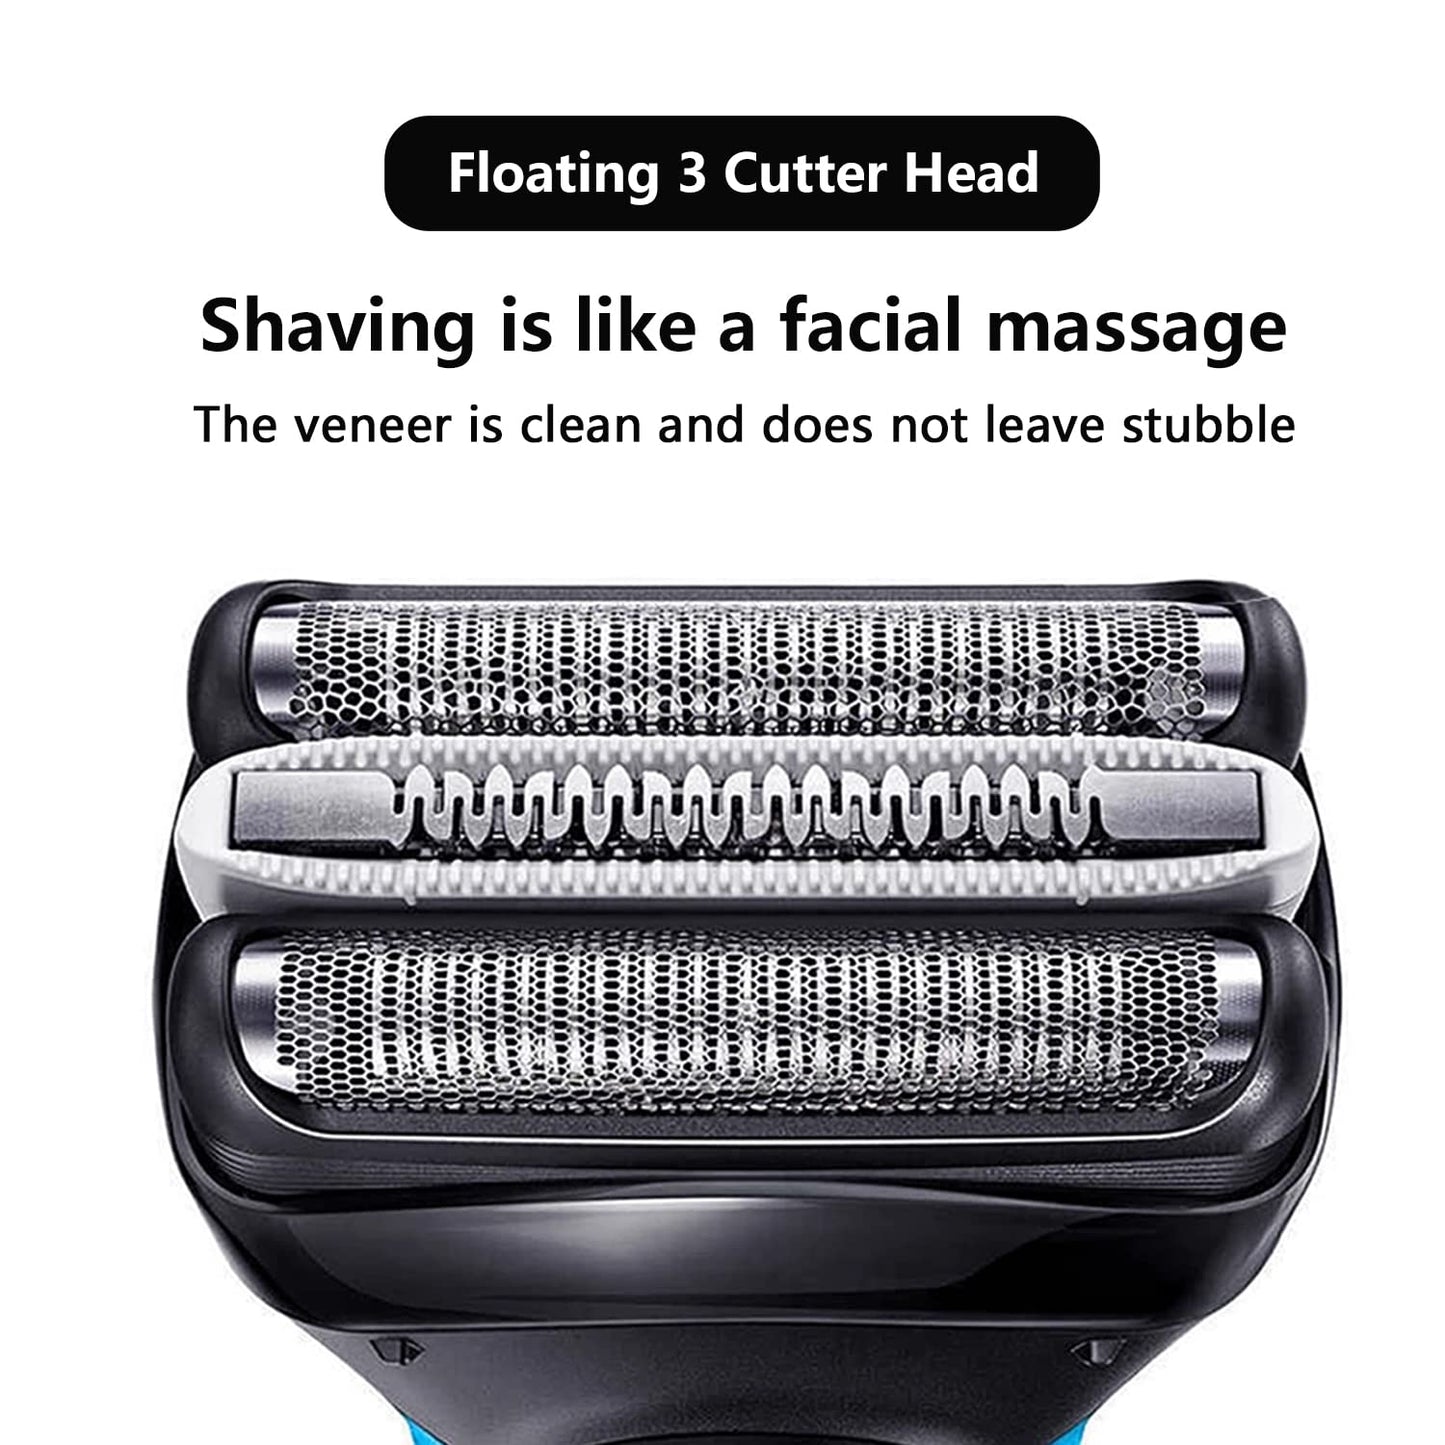 32B S3 Replacement Shaver Heads Part Accessories for Braun Series 3 Replacement Head, Shaving Head for Braun 3010s 320 330 340 370cc 3090cc 350cc-4 390cc-4 3000s 3040s 3050cc